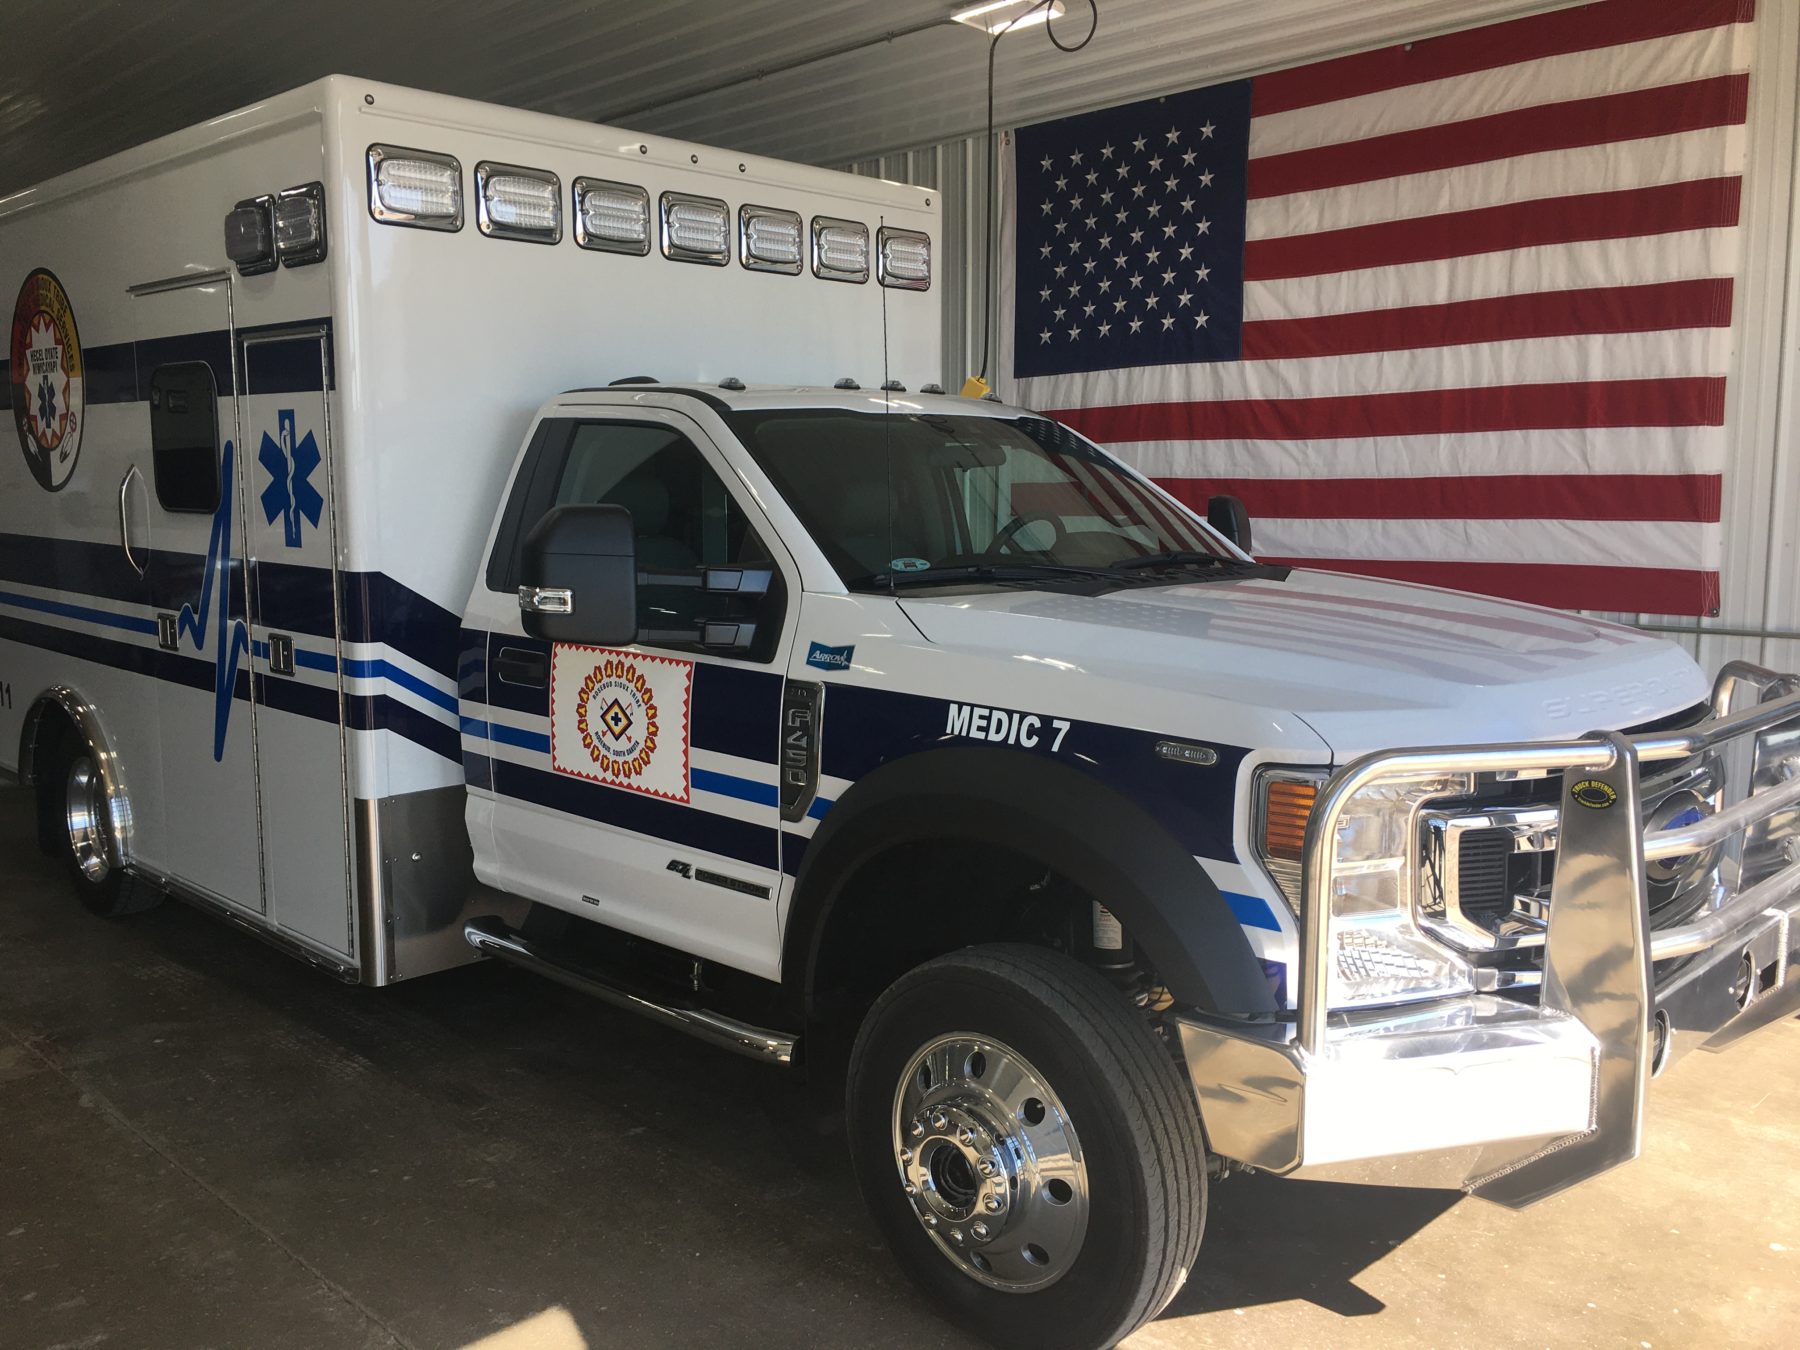 2020 Ford F450 4x4 Heavy Duty Ambulance For Sale – Picture 1